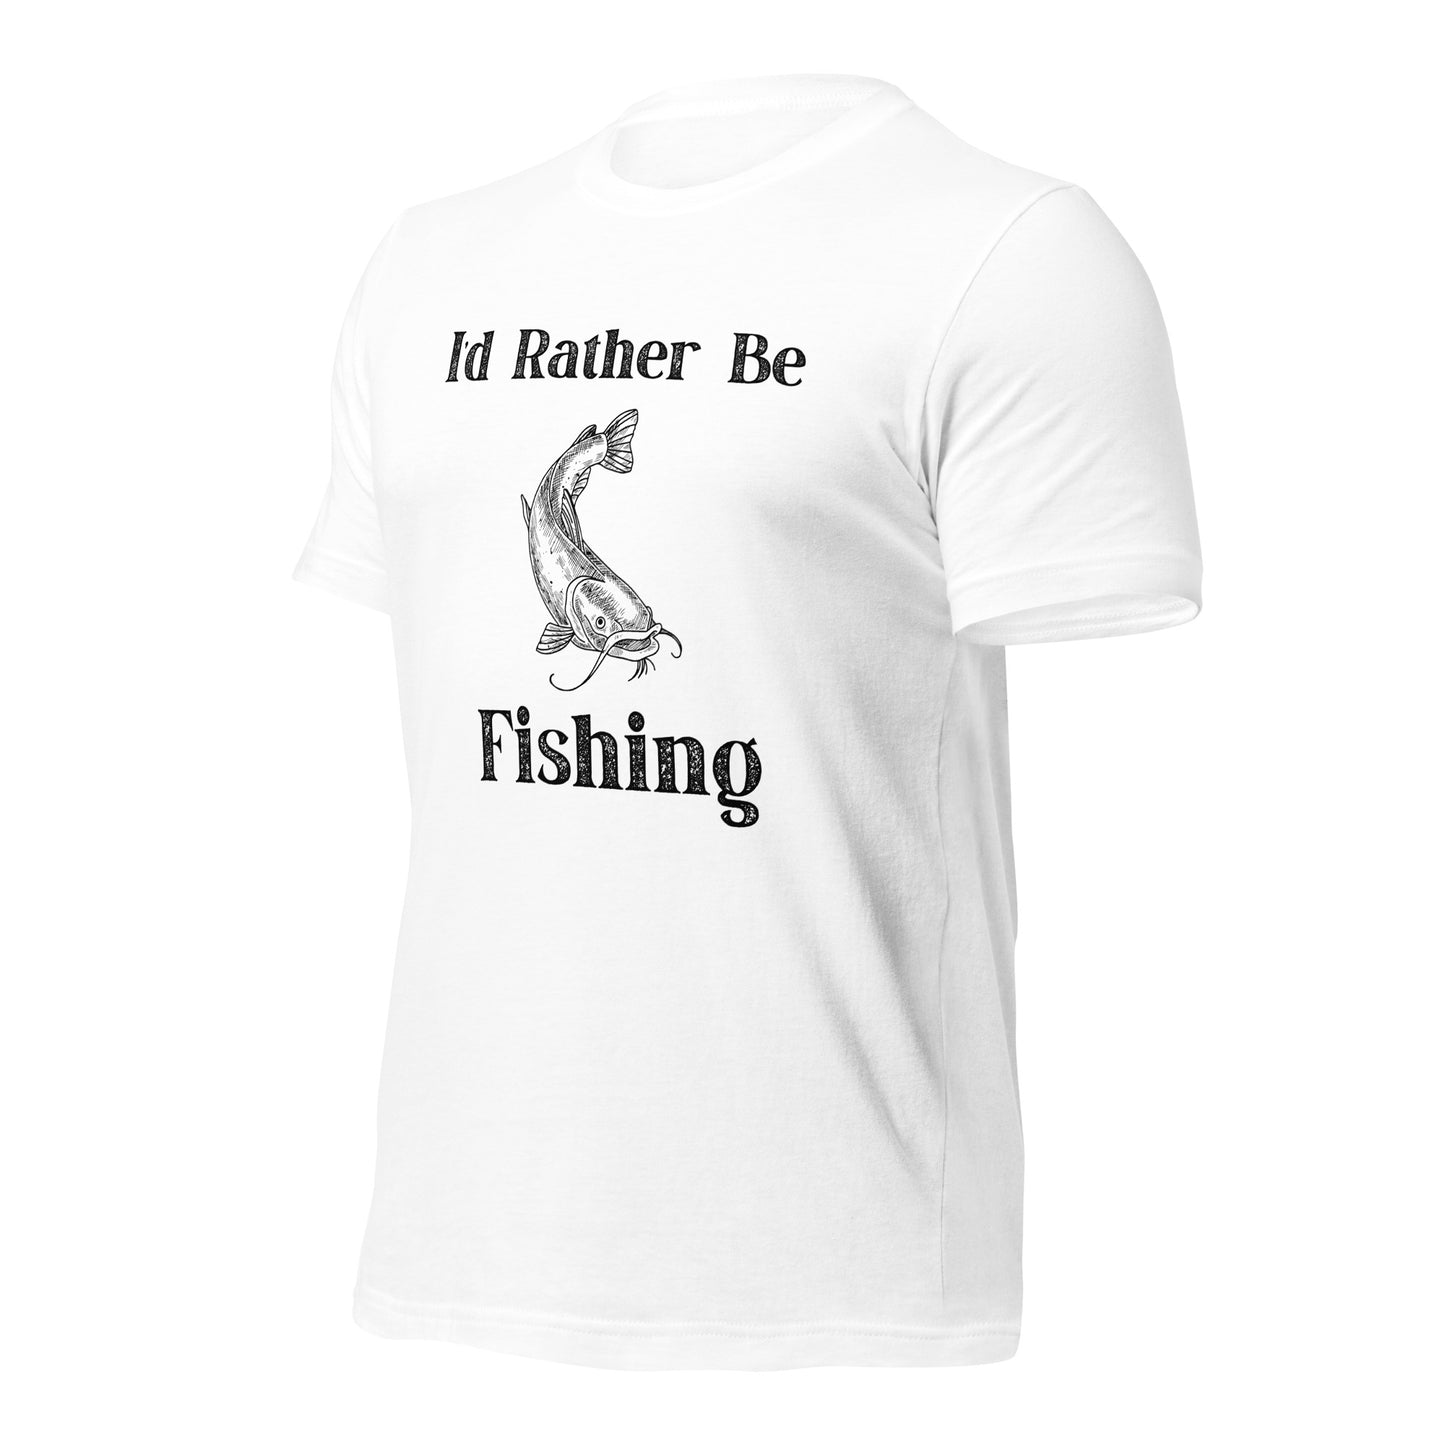 "I'd Rather Be Fishing" T-Shirt - Weave Got Gifts - Unique Gifts You Won’t Find Anywhere Else!